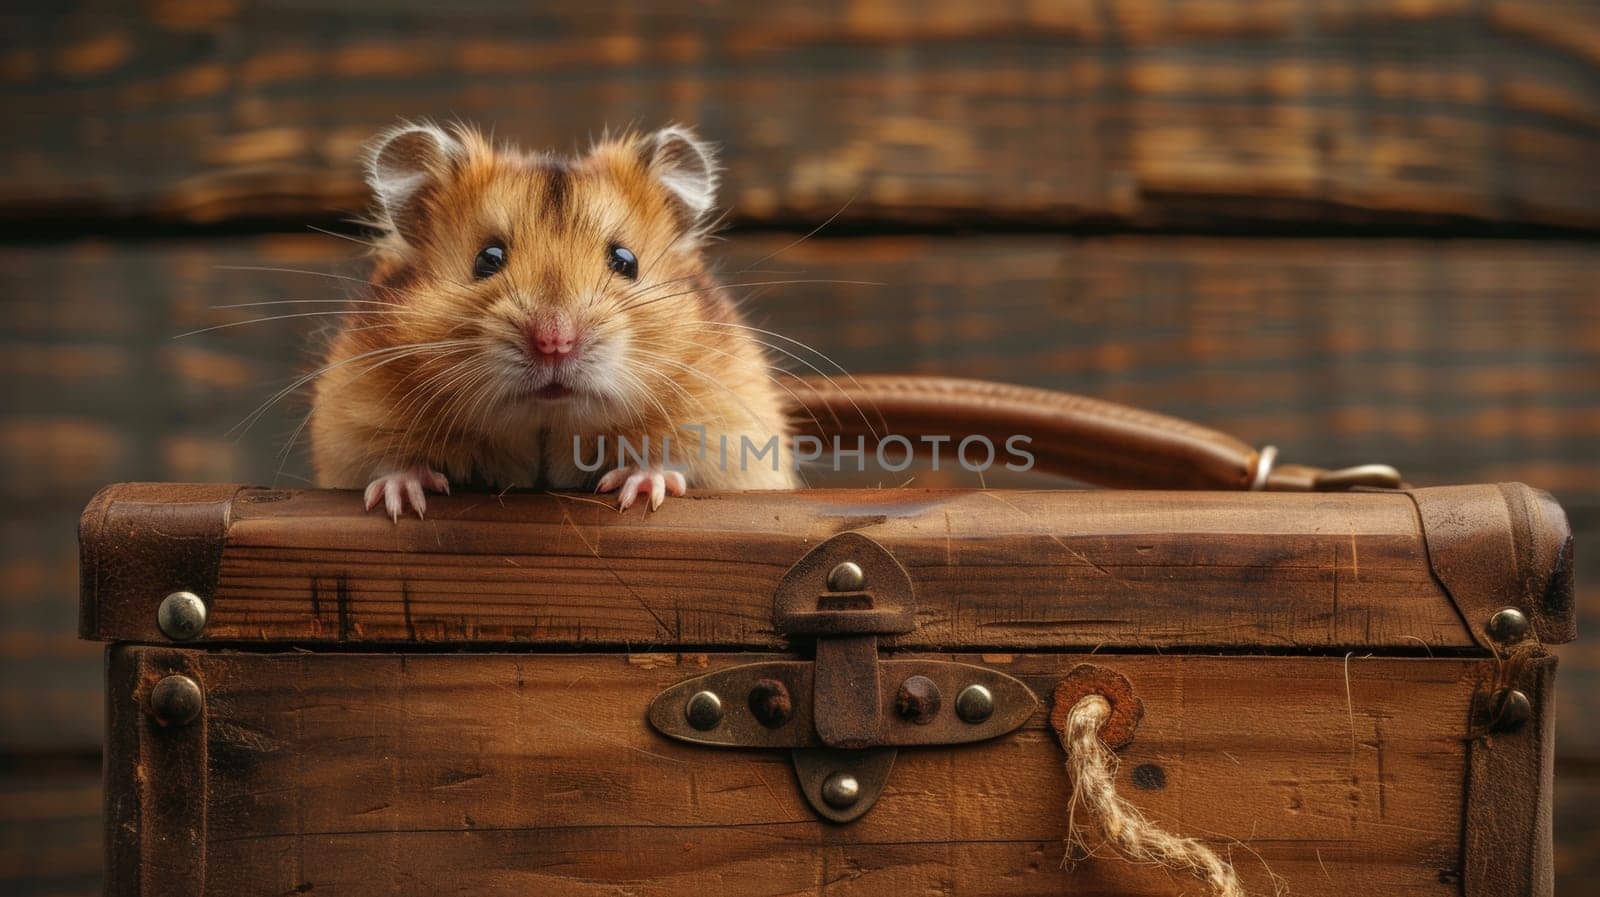 A brown and white hamster sitting on top of a wooden box, AI by starush